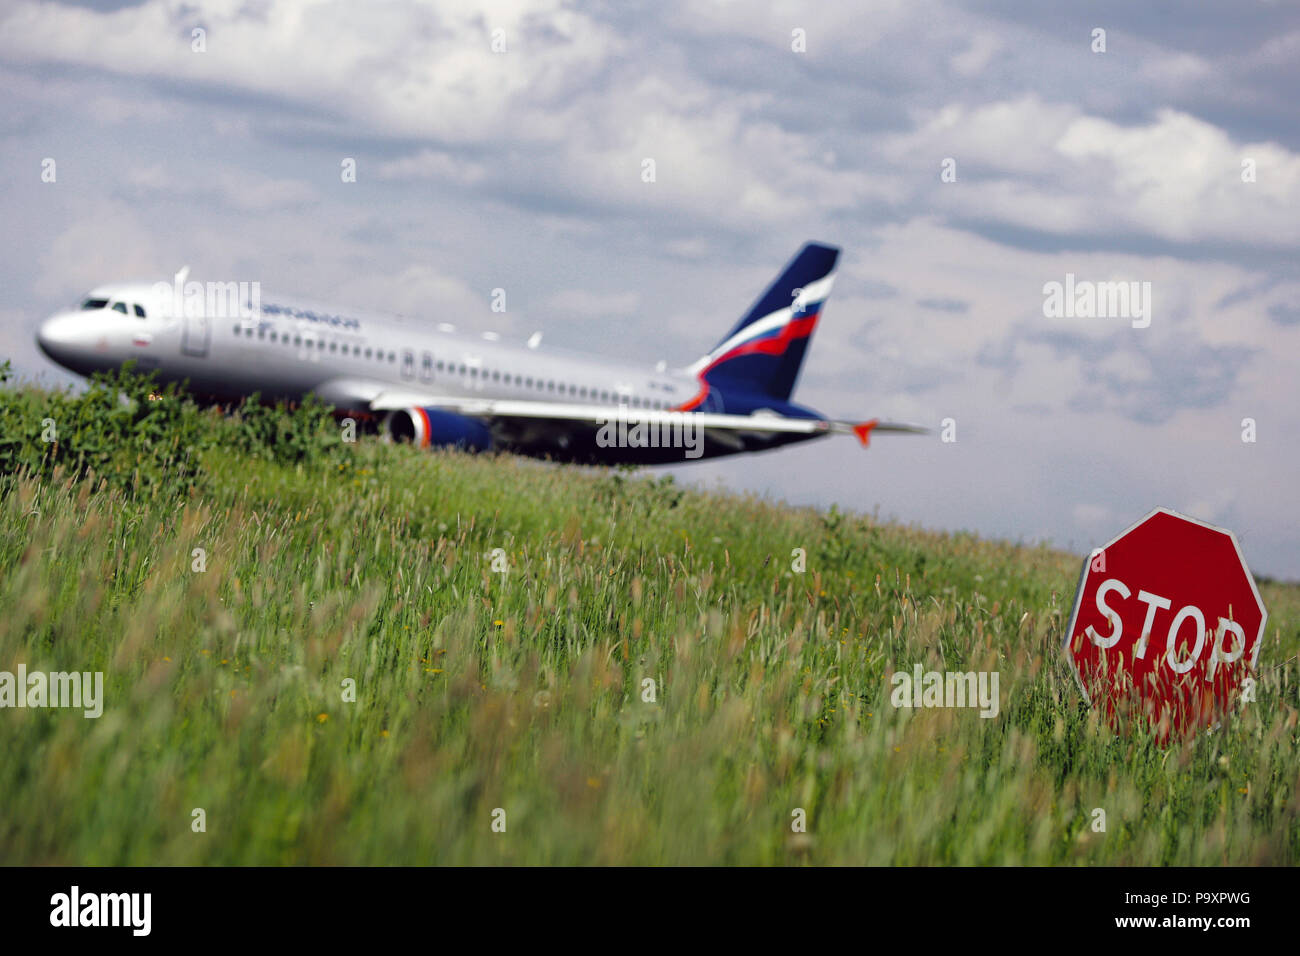 The Airbus A320 of Aeroflot Russian Airlines pictured in blur behind the STOP sign. Stock Photo